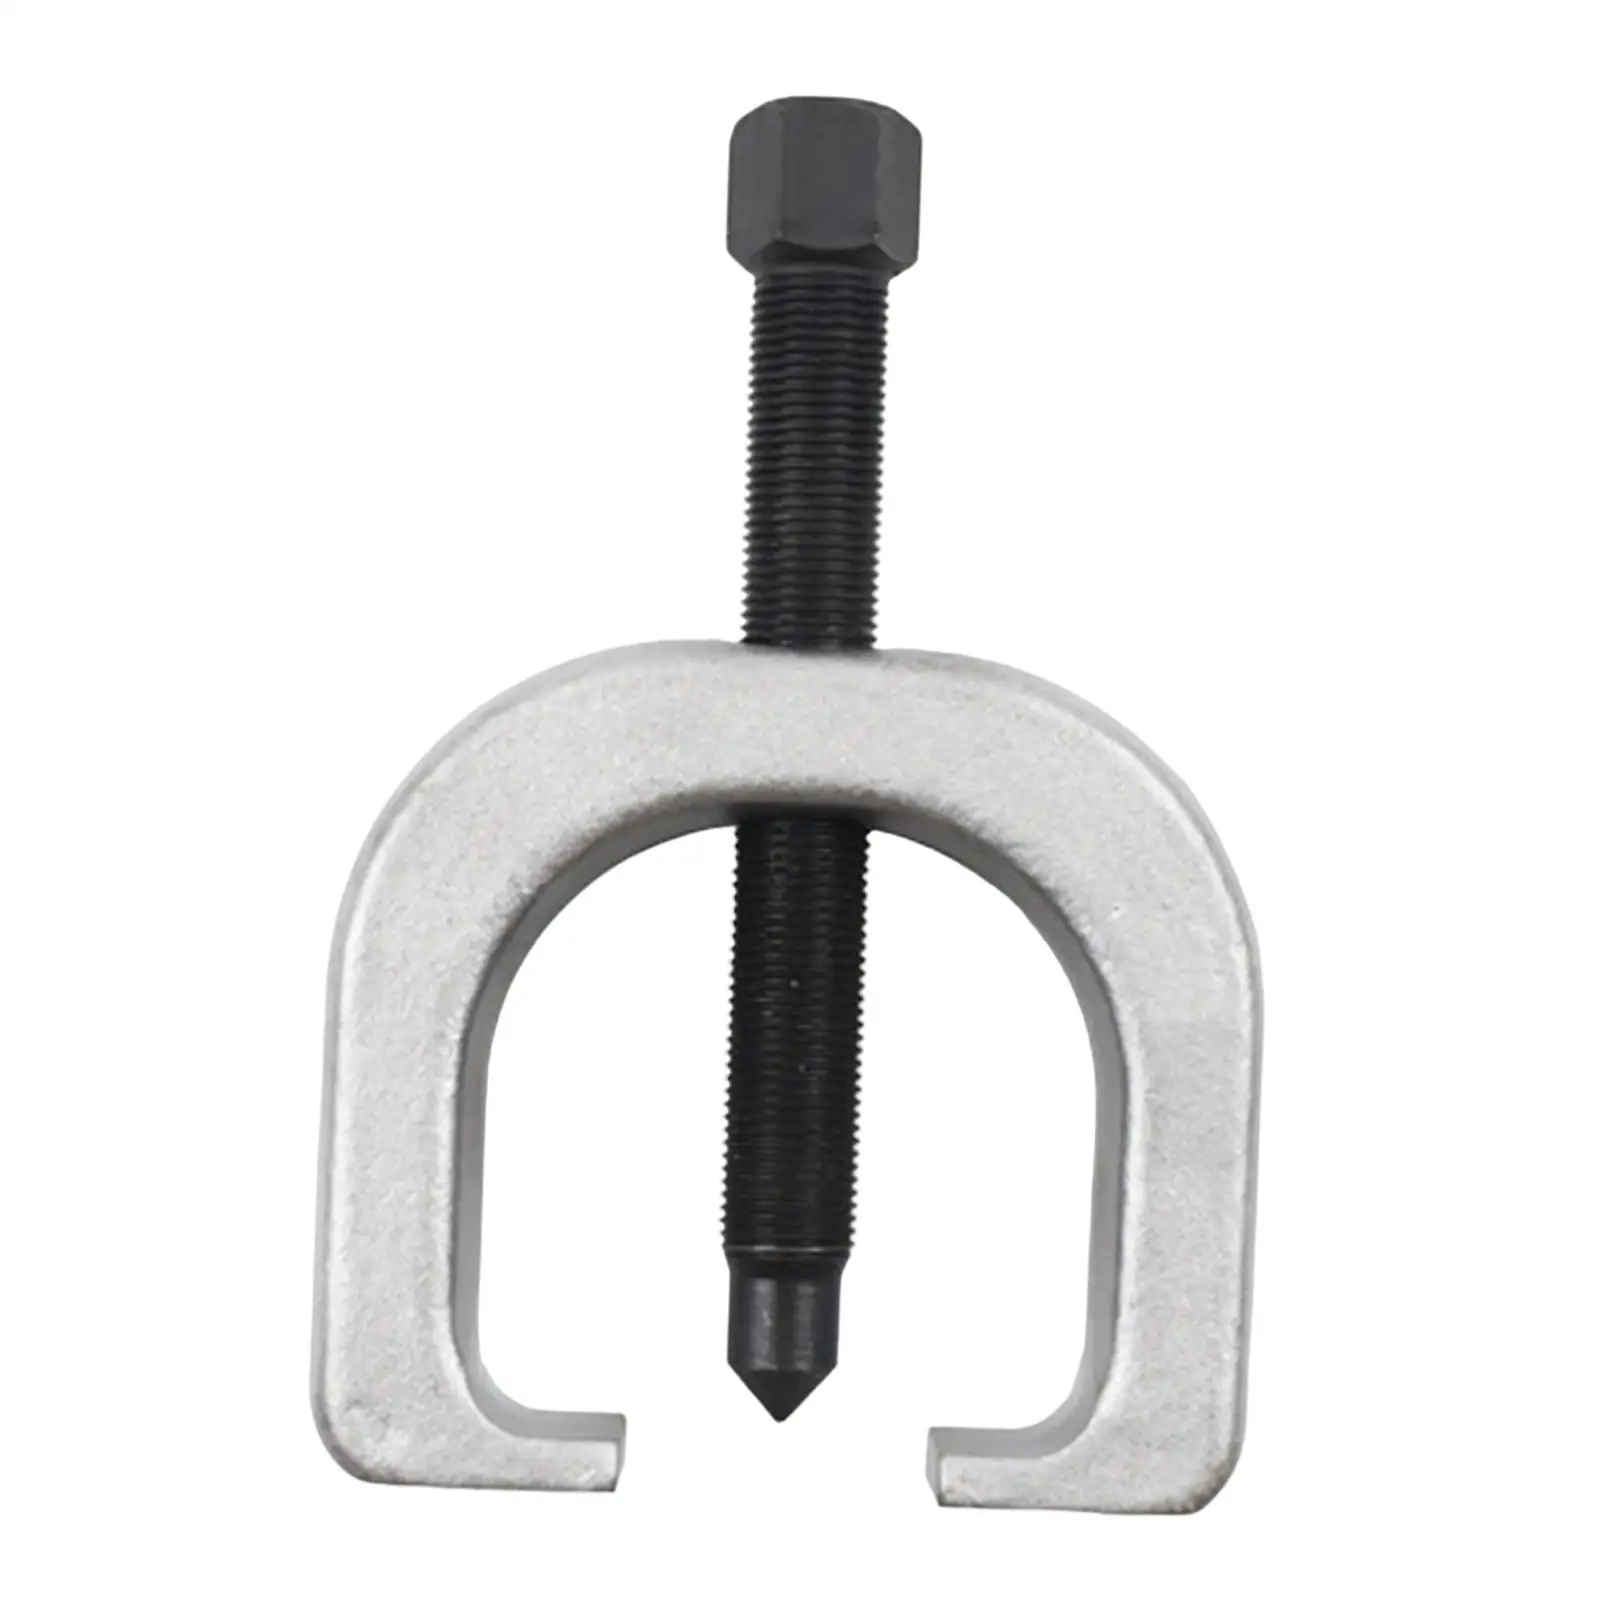 Slack Adjuster Puller Easy to Operate Compact Sturdy Professional Carbon Steel Removal Tool Repair Tool for Trailers Trucks